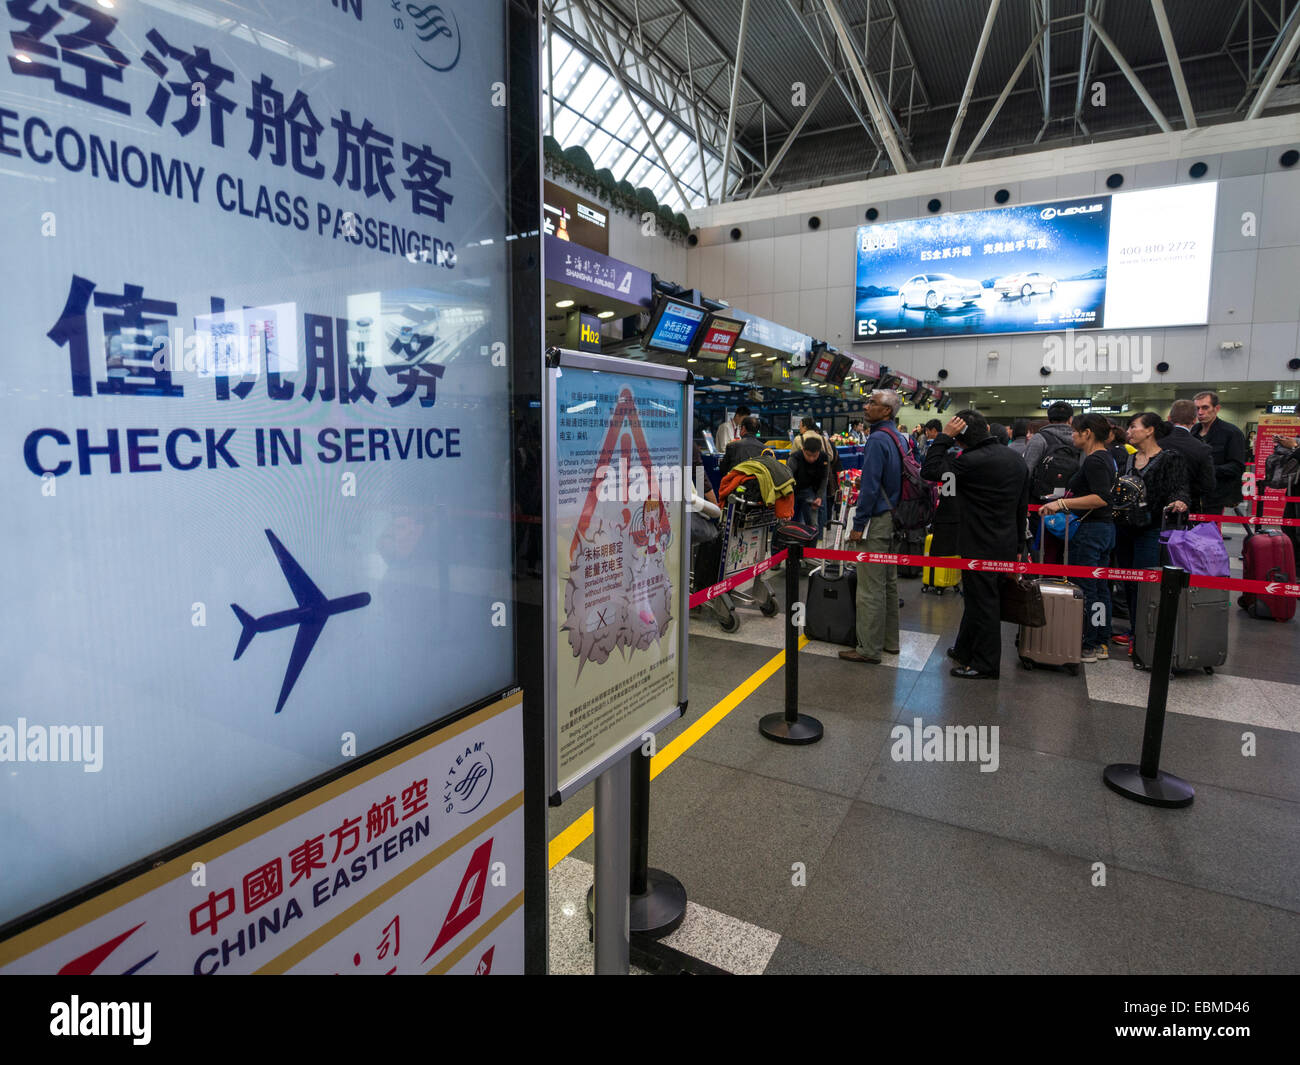 Passengers with luggage waiting in line at the check in counter at Beijing Capital International Airport, China Stock Photo